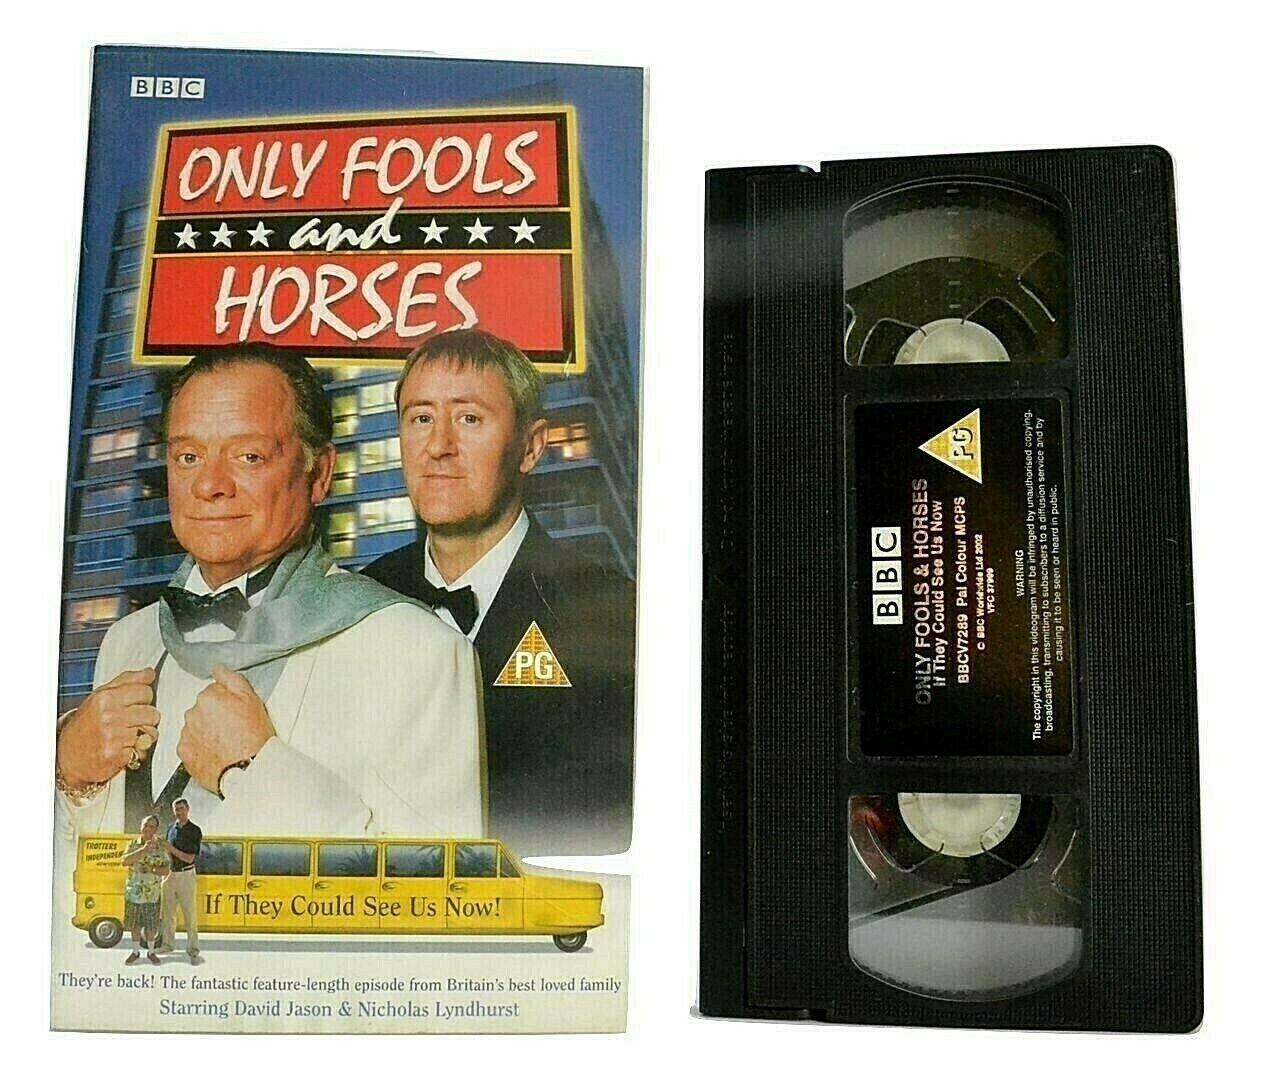 Only Fools And Horses: 'If They Could See Us Now' - BBC Comedy Series - Pal VHS-